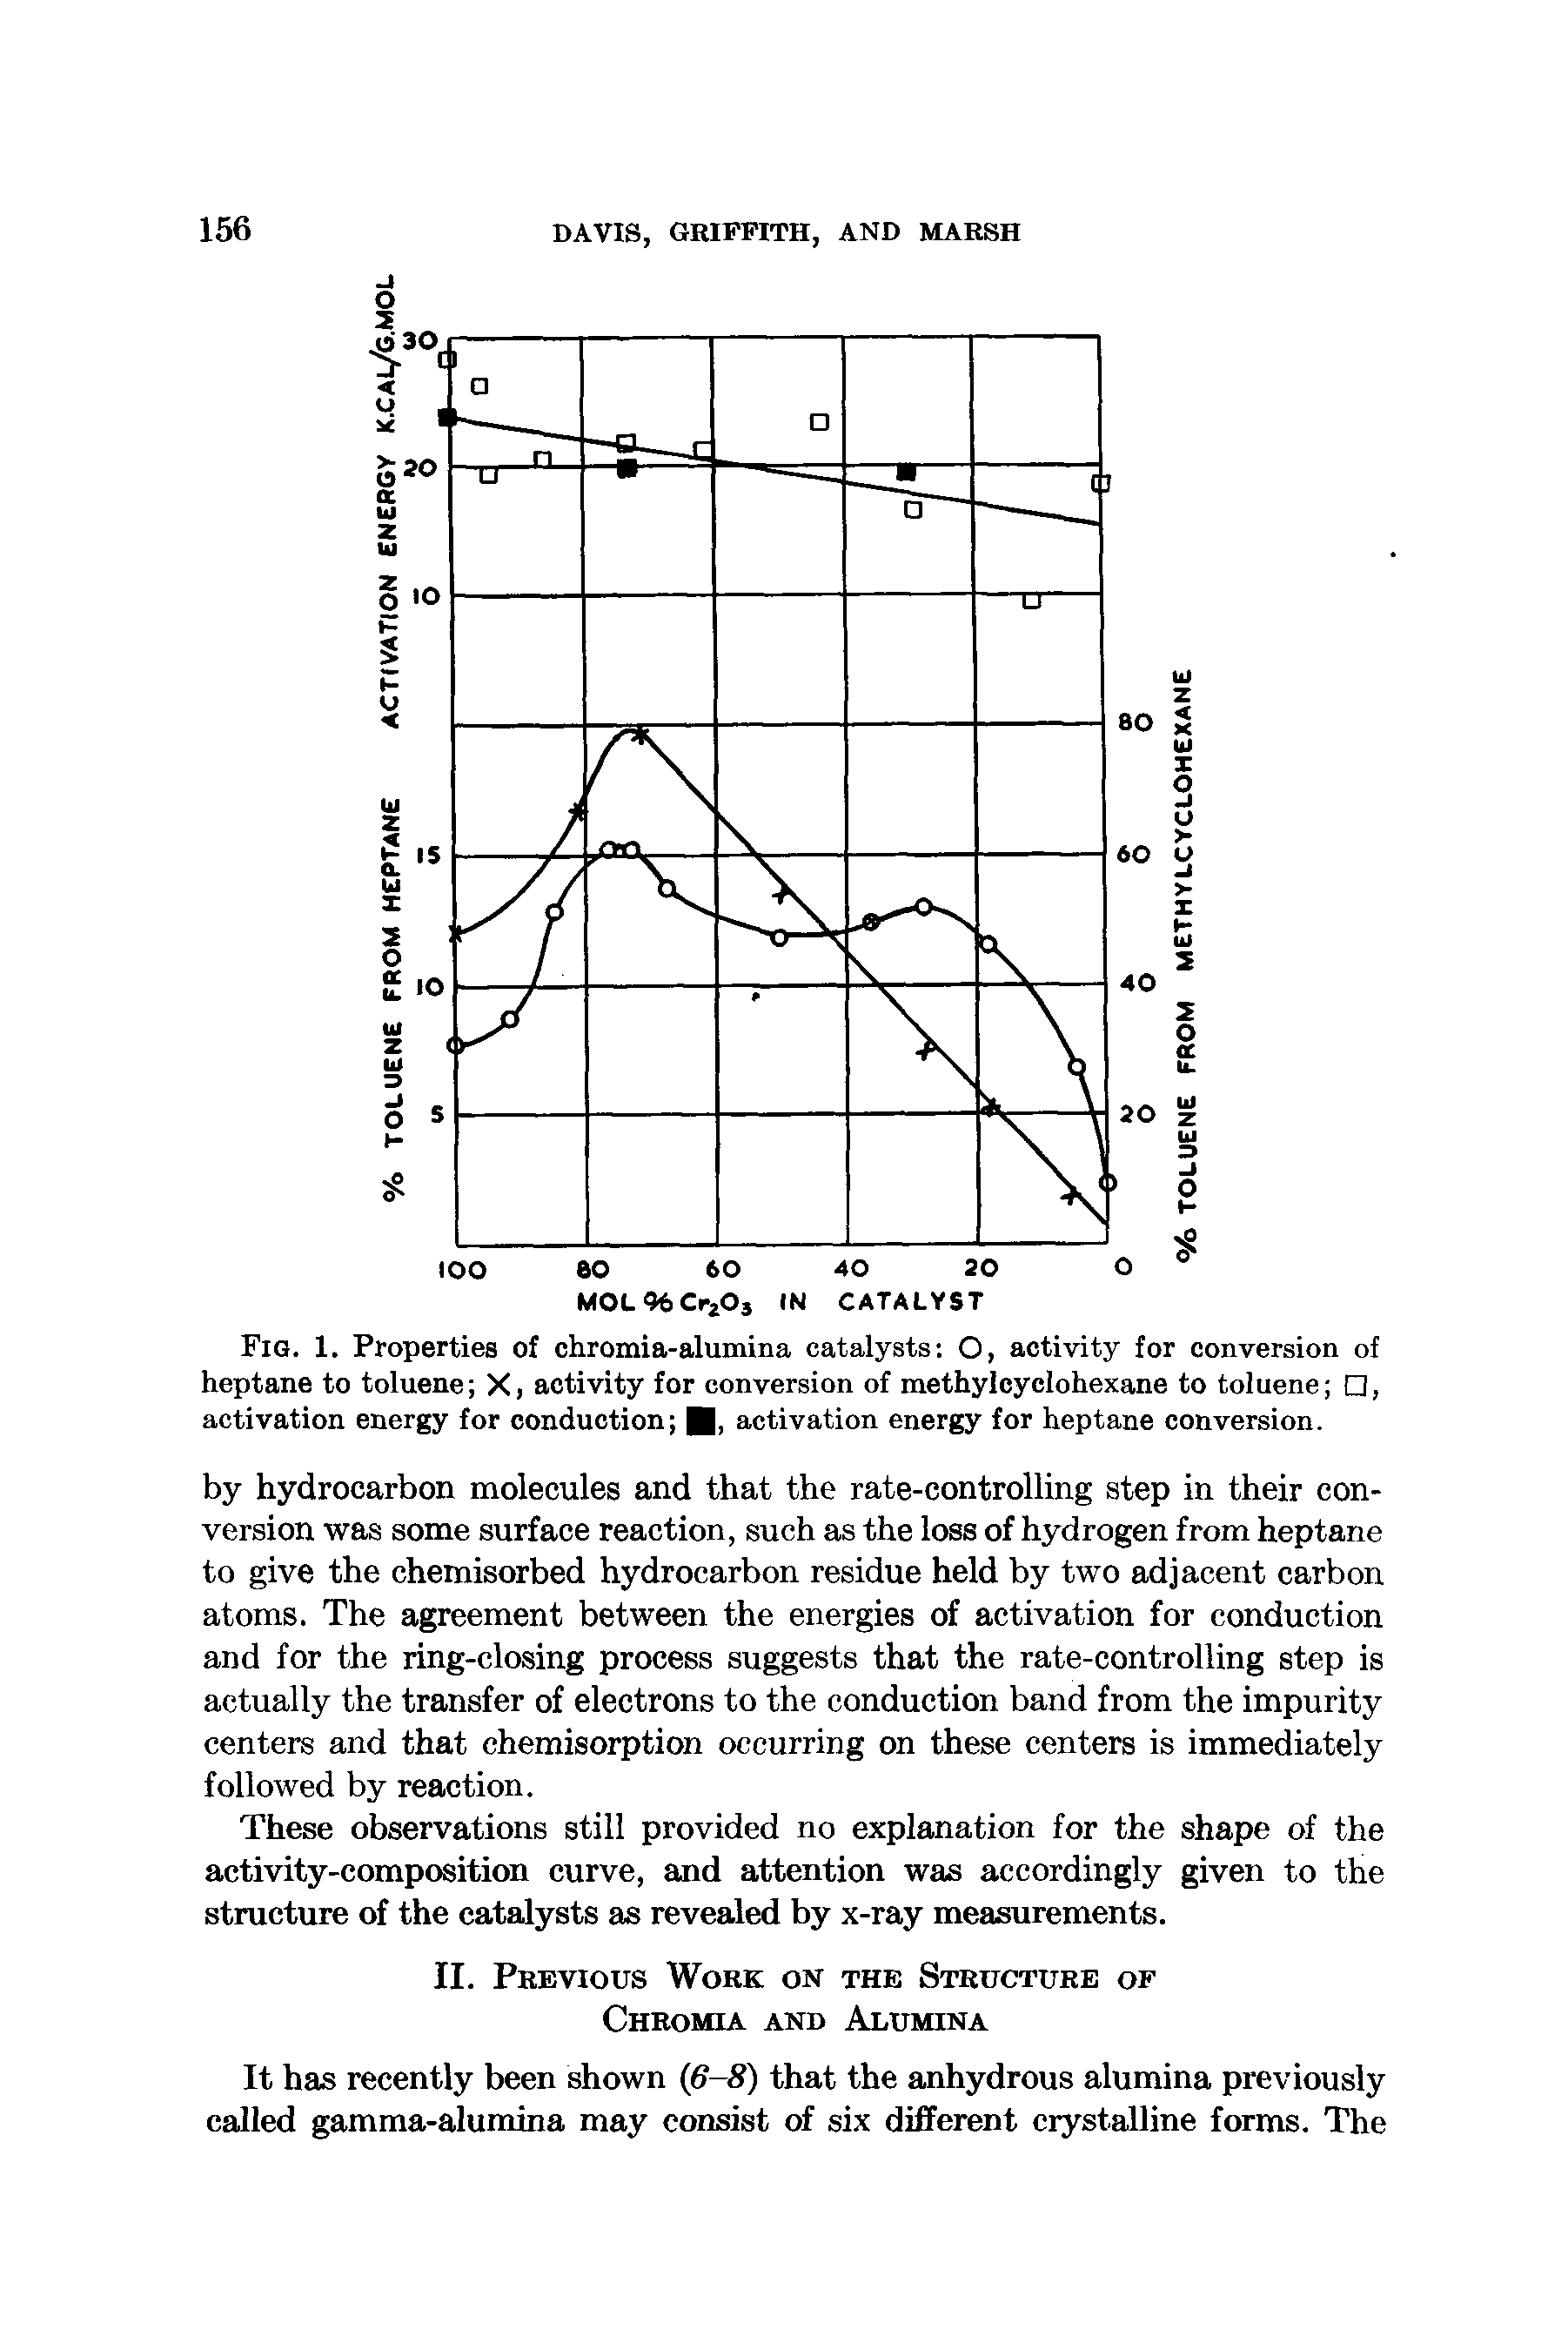 Fig. 1. Properties of chromia-alumina catalysts O, activity for conversion of heptane to toluene X, activity for conversion of methylcyclohexane to toluene , activation energy for conduction activation energy for heptane conversion.